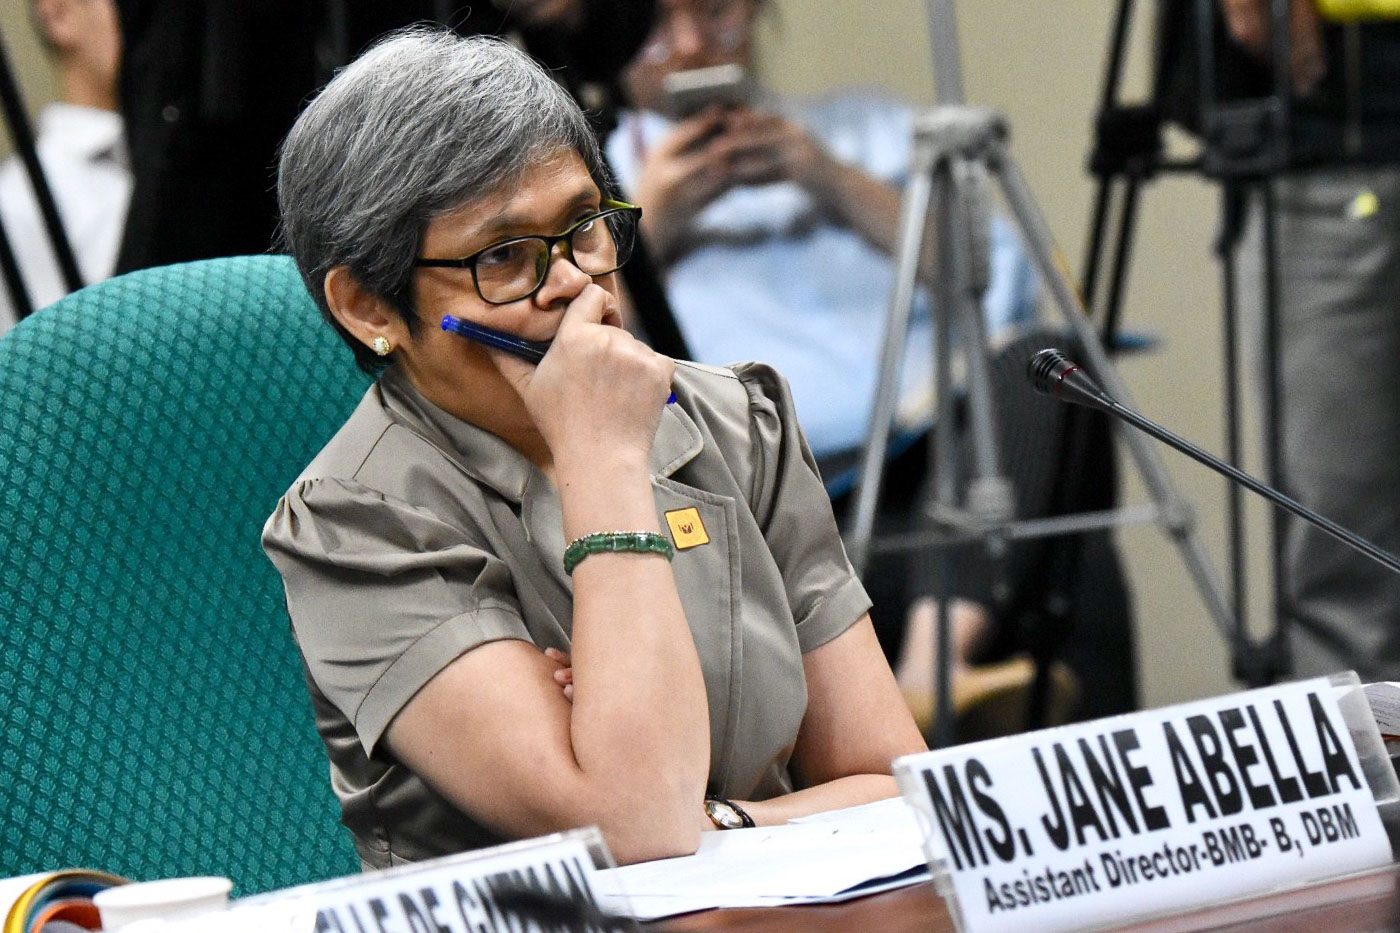 BUDGET DEPARTMENT. Department of Budget and Management Assistant Director Jane Abella answers questions of Sen. Franklin Drilon at the senate budget hearing of the Department of Health. September 17, 2018. Photo by Angie de Silva/Rappler 